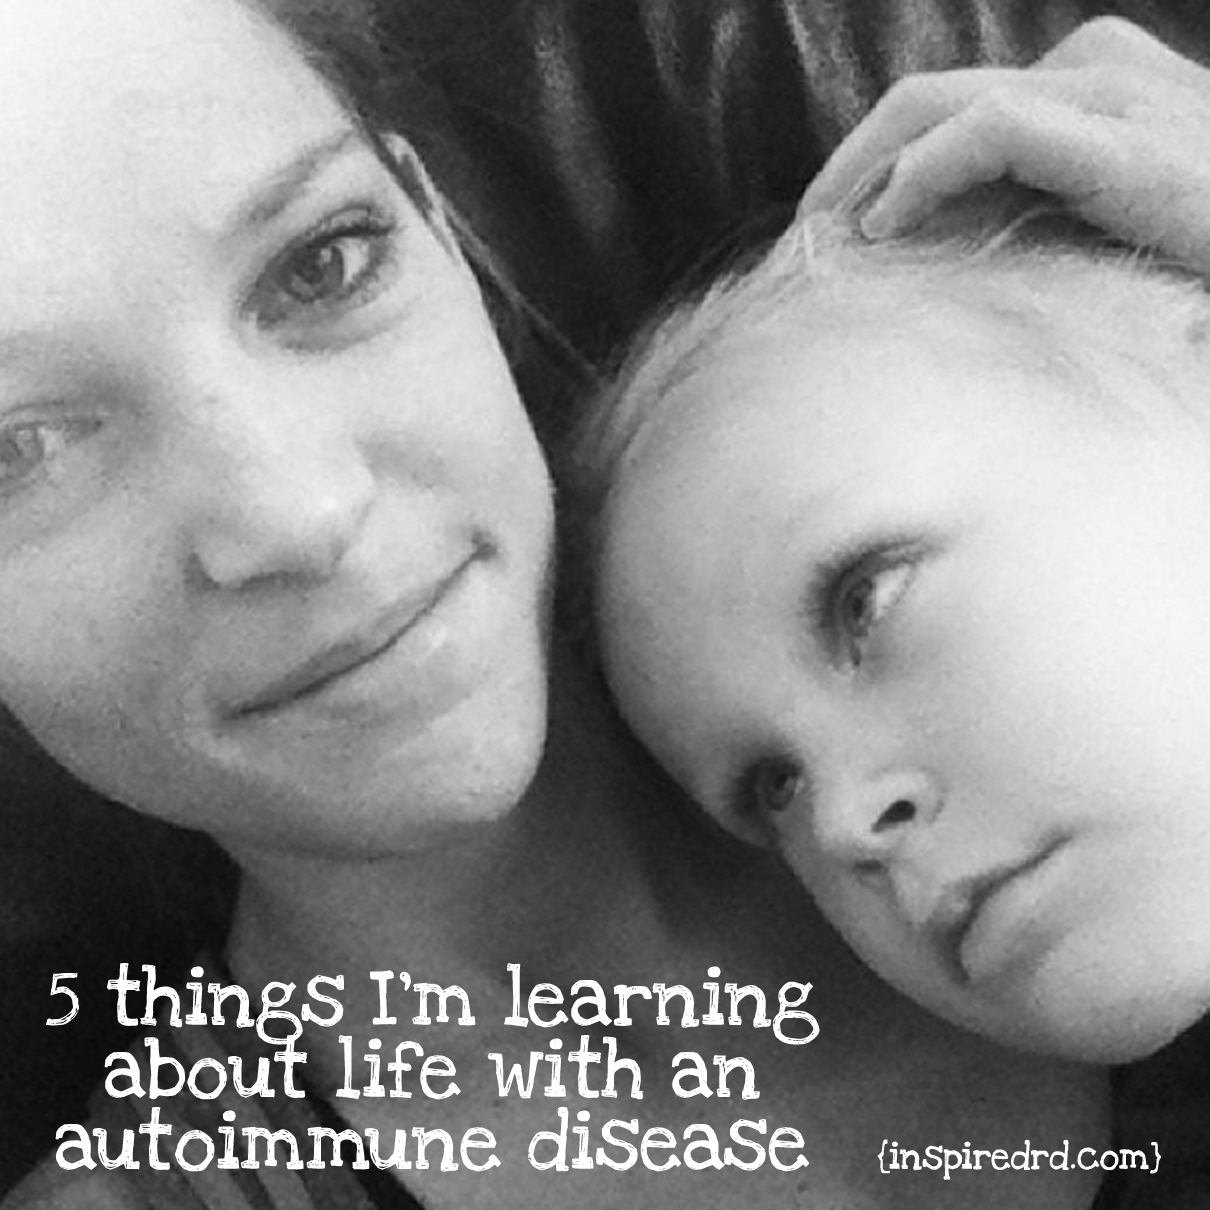 5 Things I'm Learning about Life with an Autoimmune Disease (inspiredrd.com) #celiac